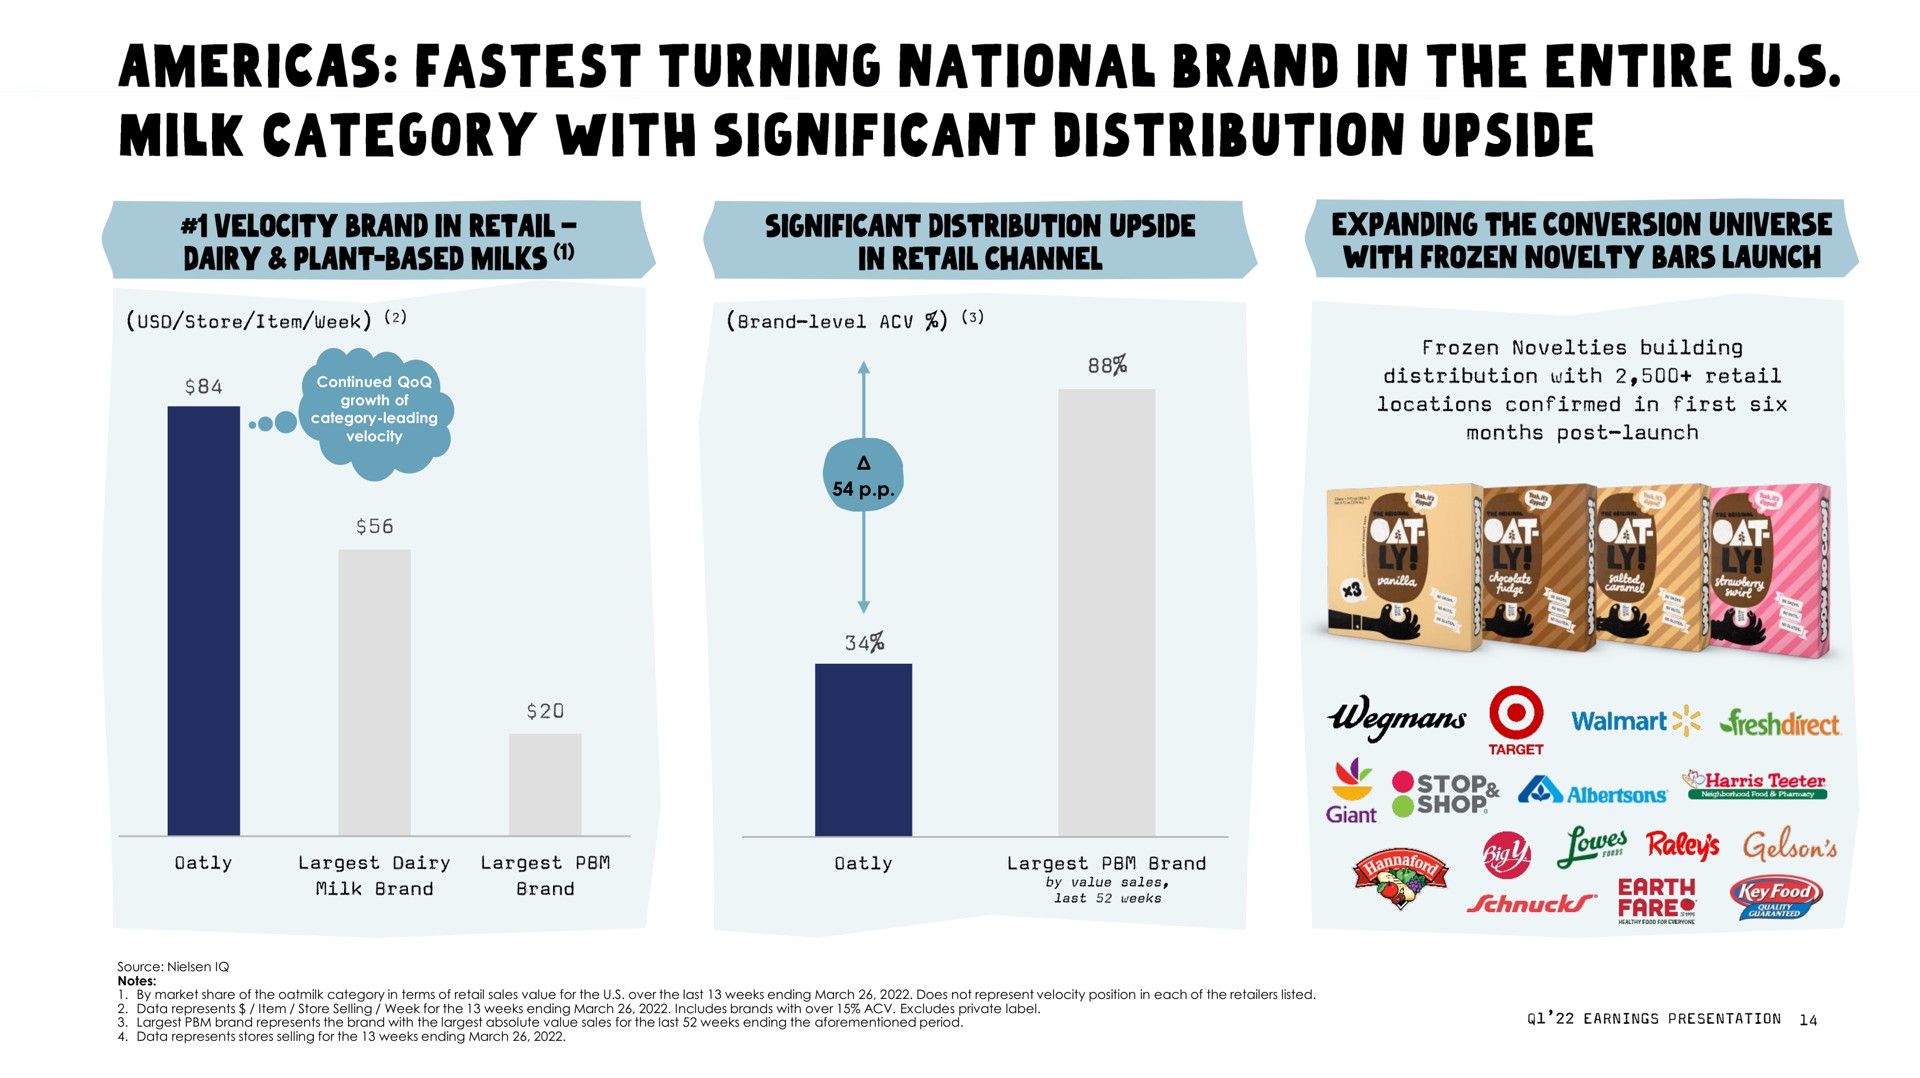 turning national brand in the entire milk category with significant distribution upside | Oatly